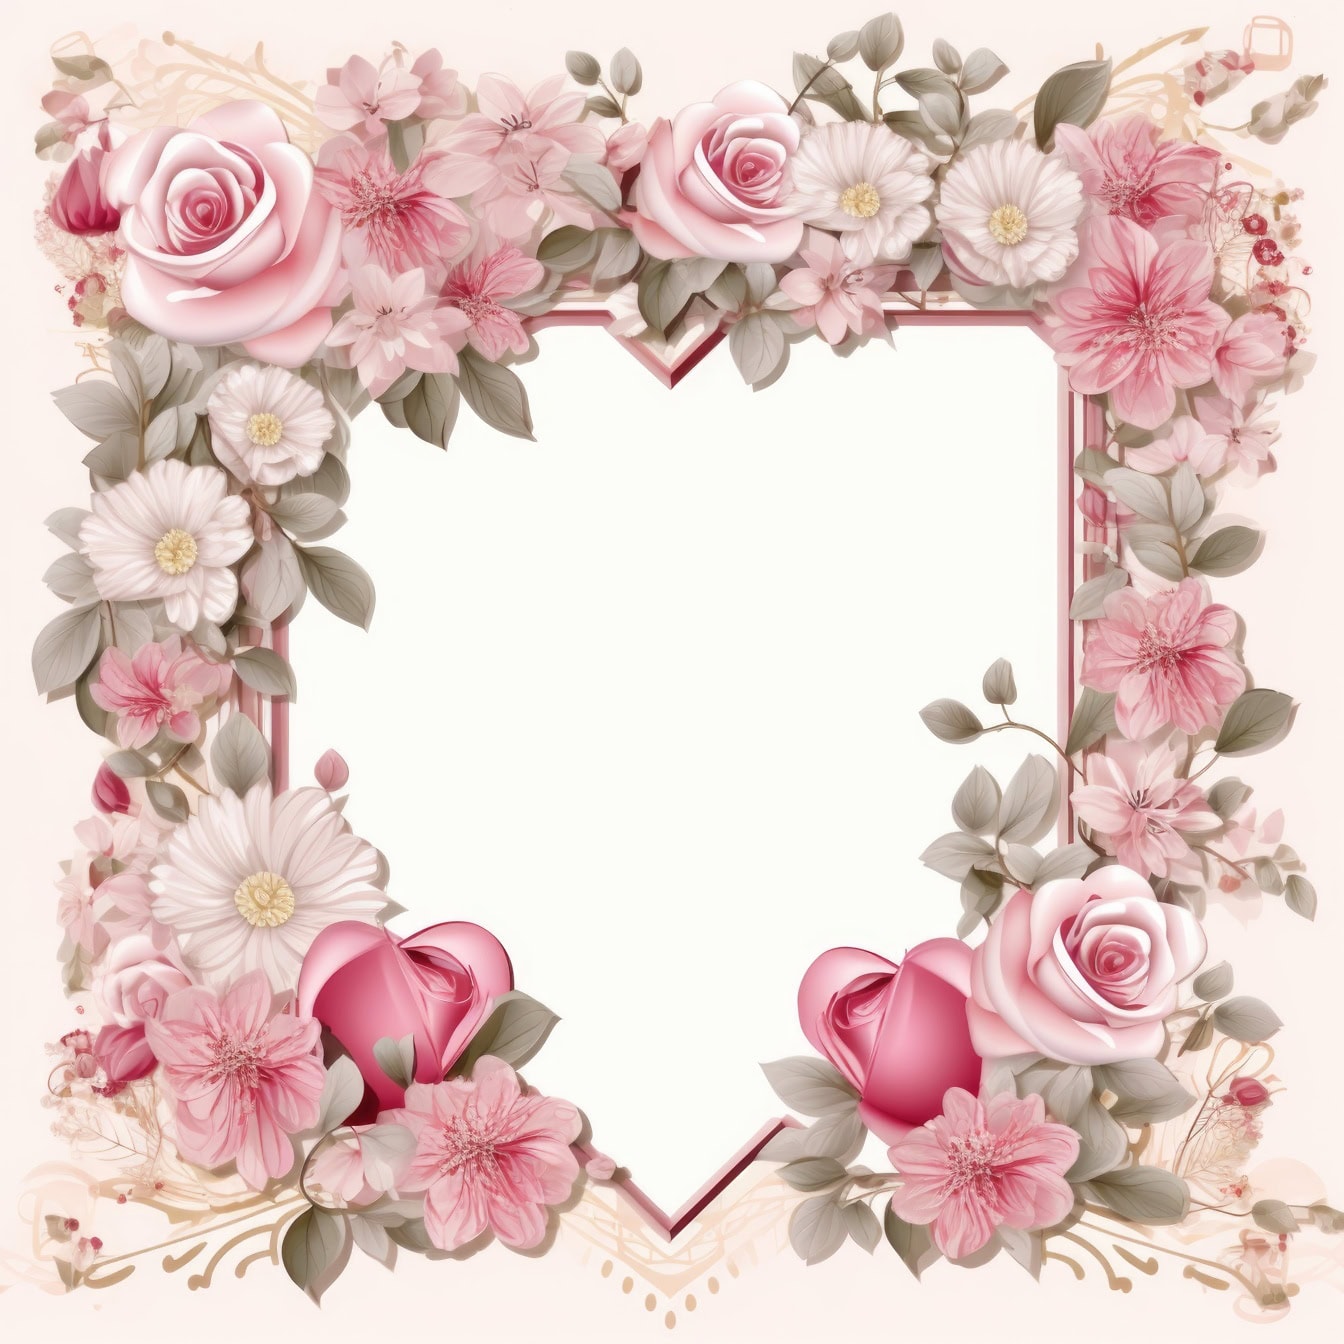 Valentine’s Day invitation card template with a frame of pinkish flowers and leaves